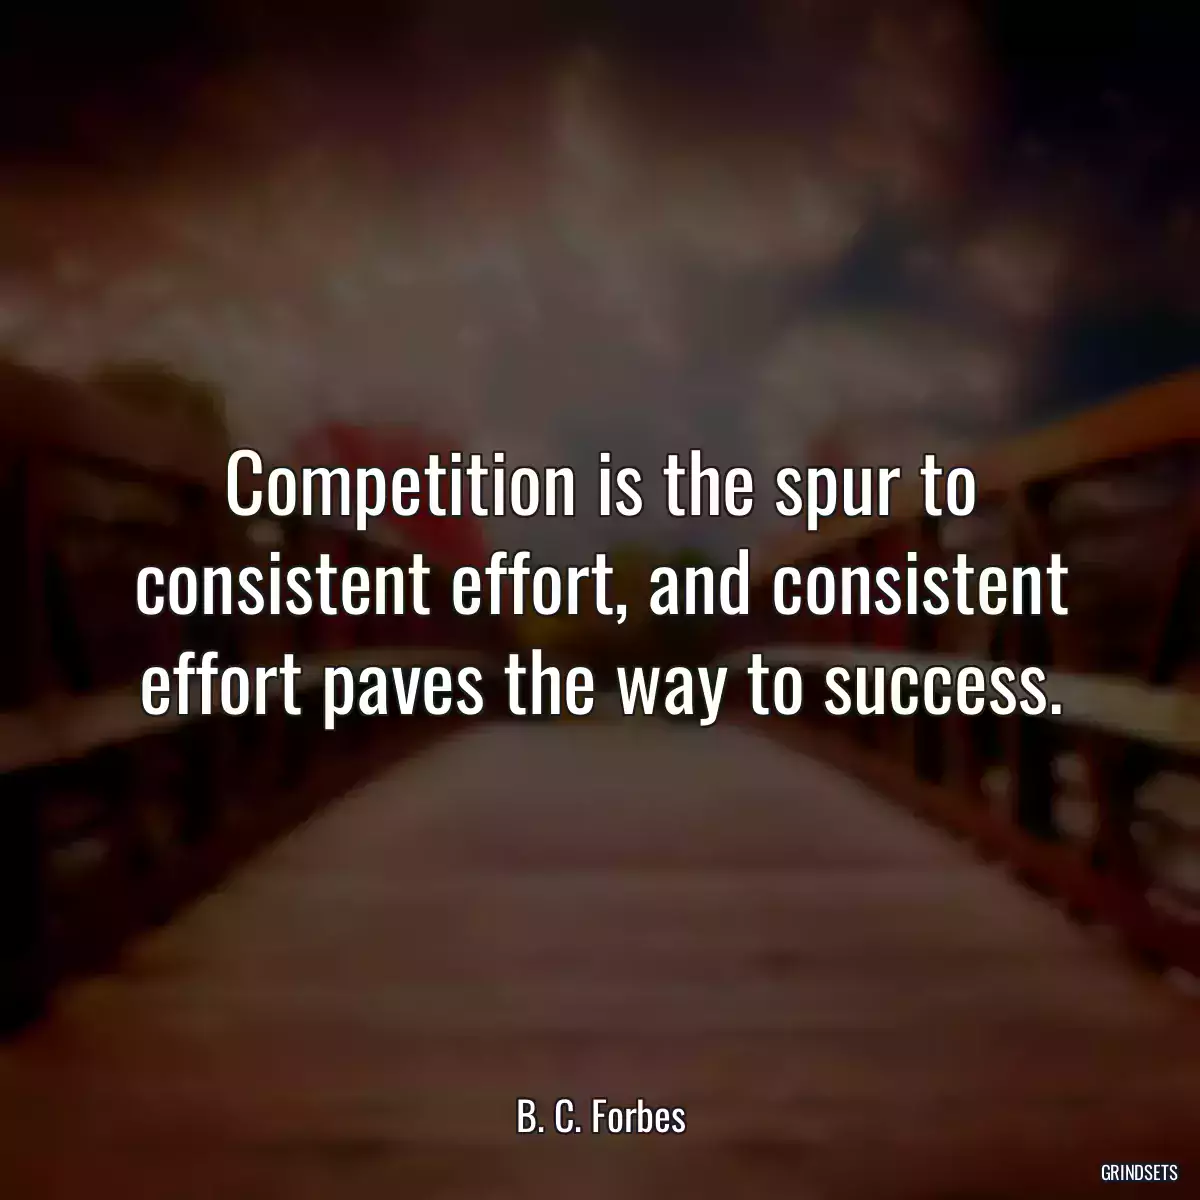 Competition is the spur to consistent effort, and consistent effort paves the way to success.